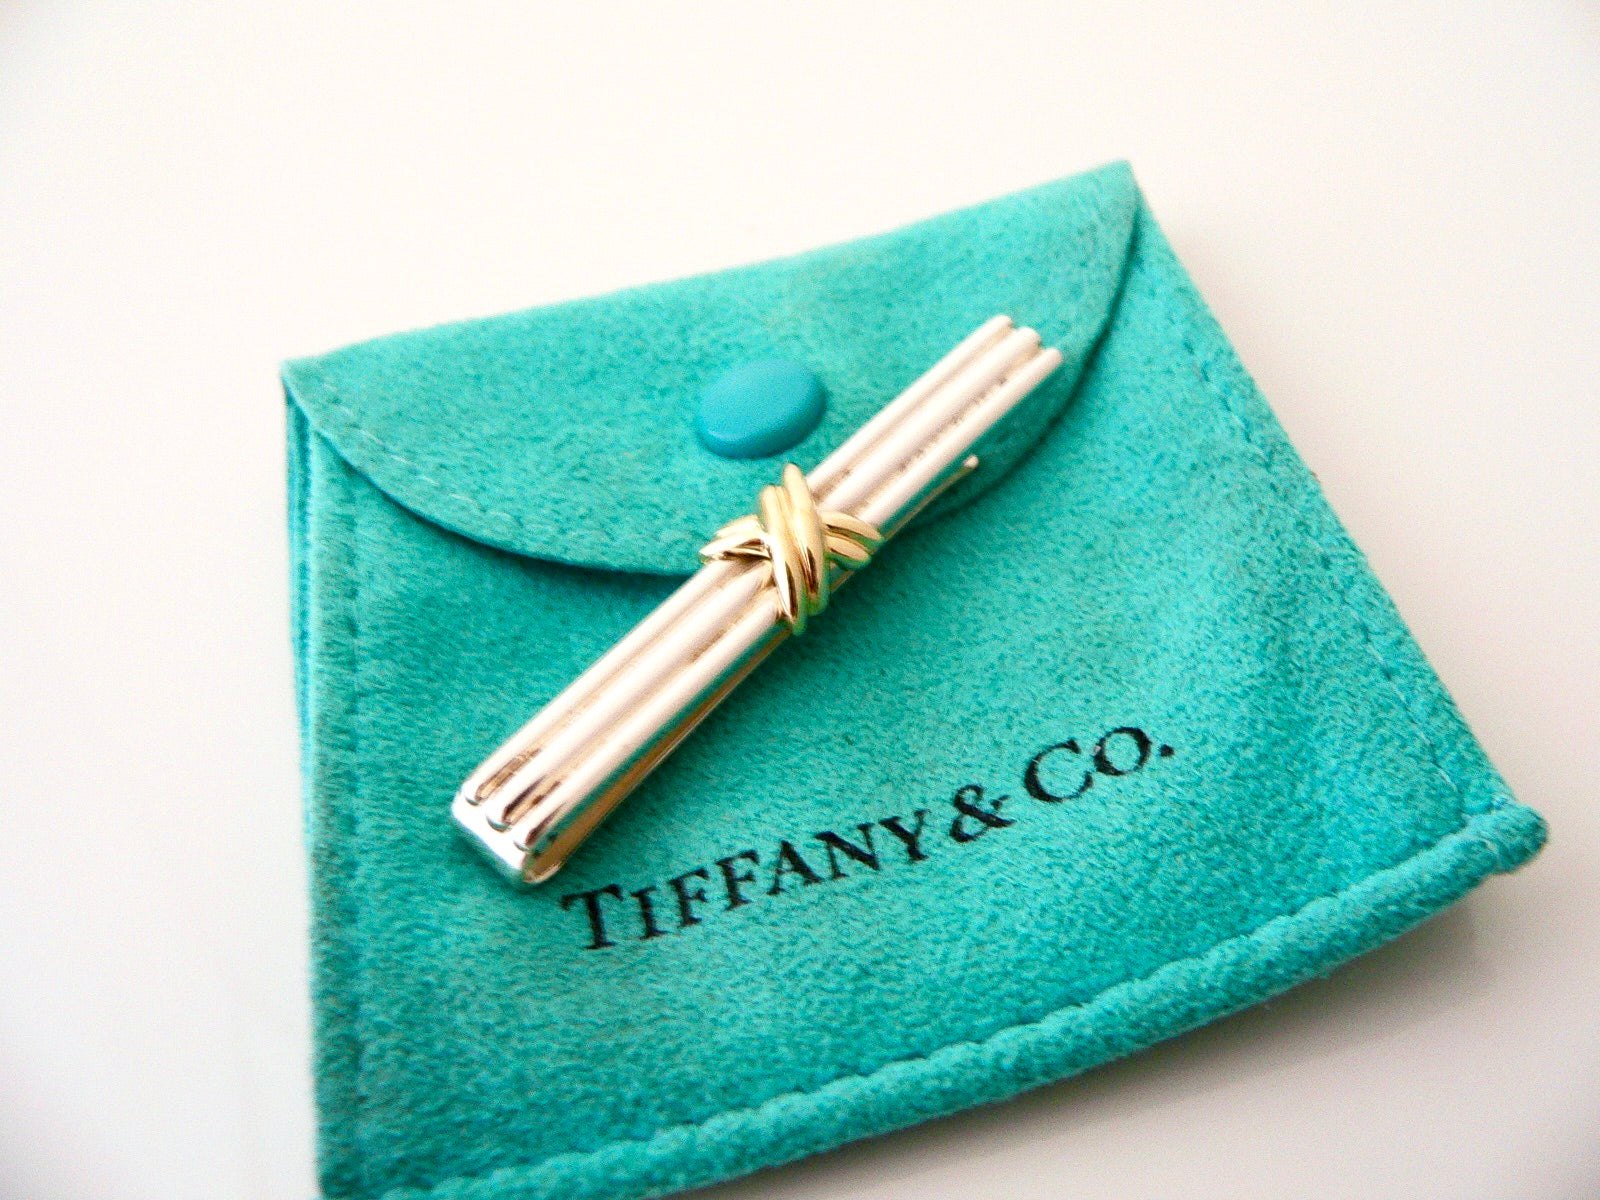 Tiffany and Co. Gold Fish Hook Tie Clip